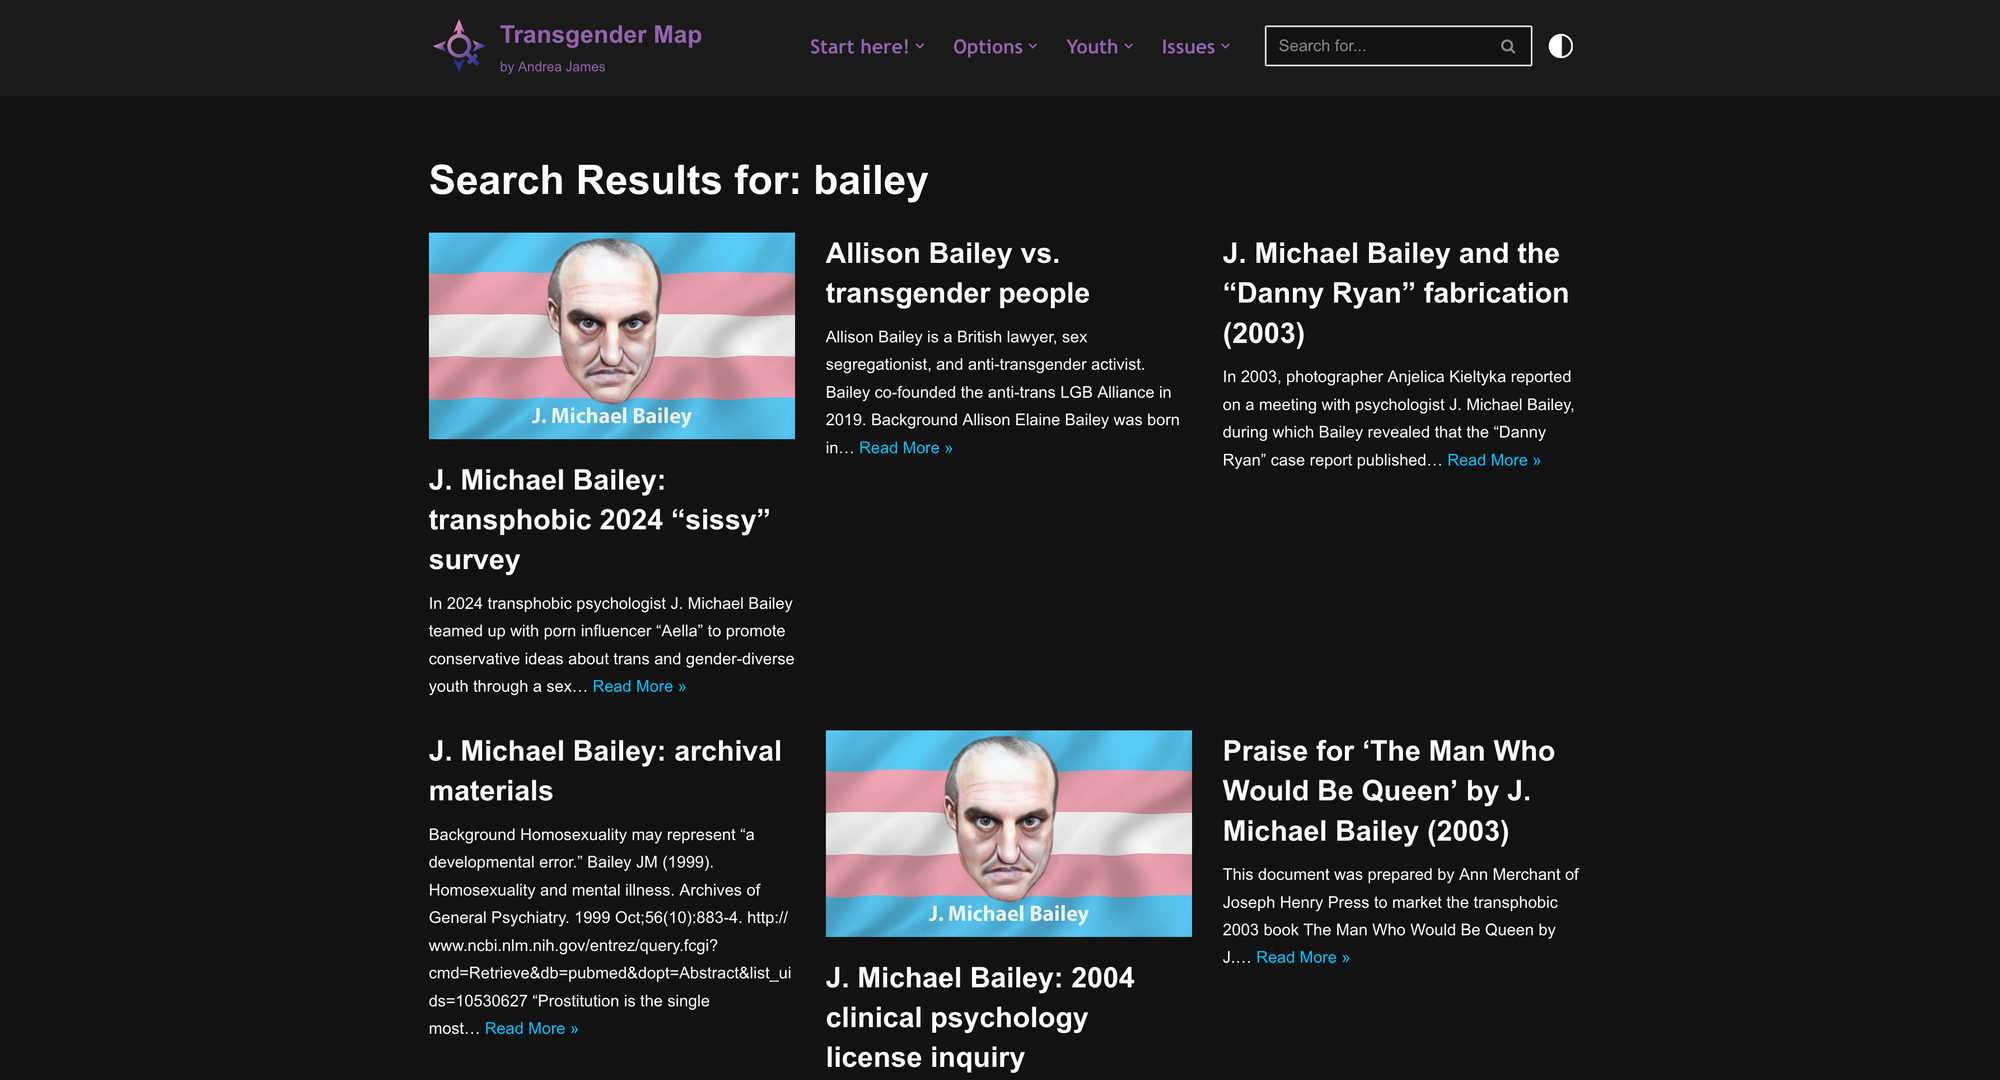 A page from the Transgender Map, with caricatures of Bailey imposed on a trans flag.